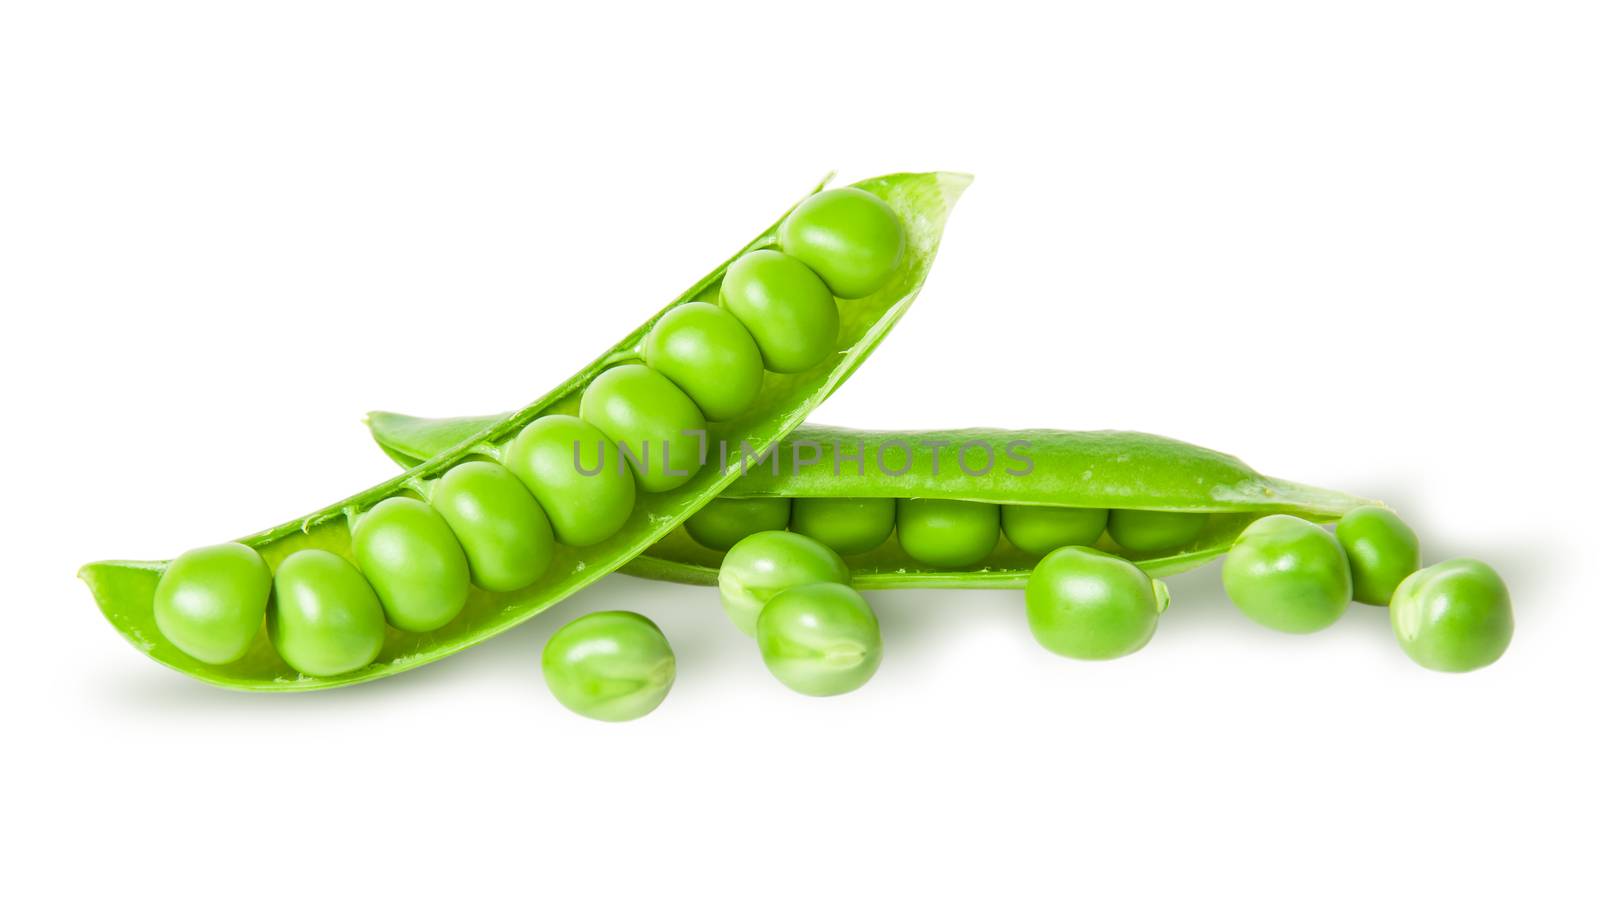 Two disclosed pea pods and peas by Cipariss